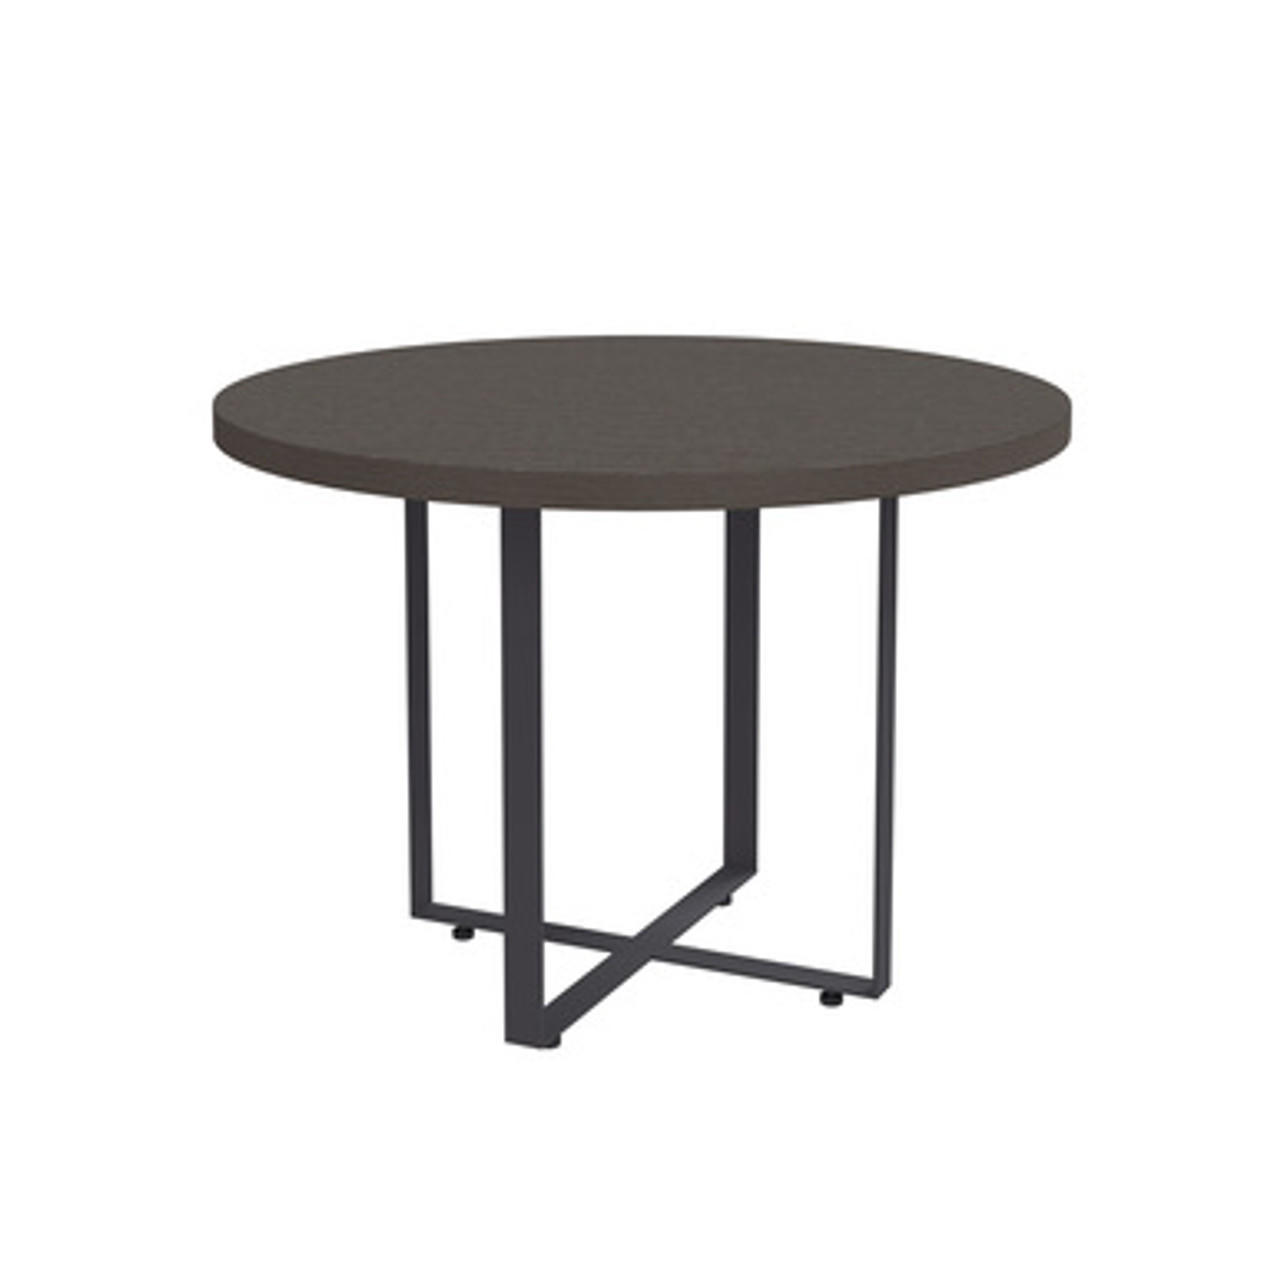  Office Source Palisades 42" Round Table EV42R 